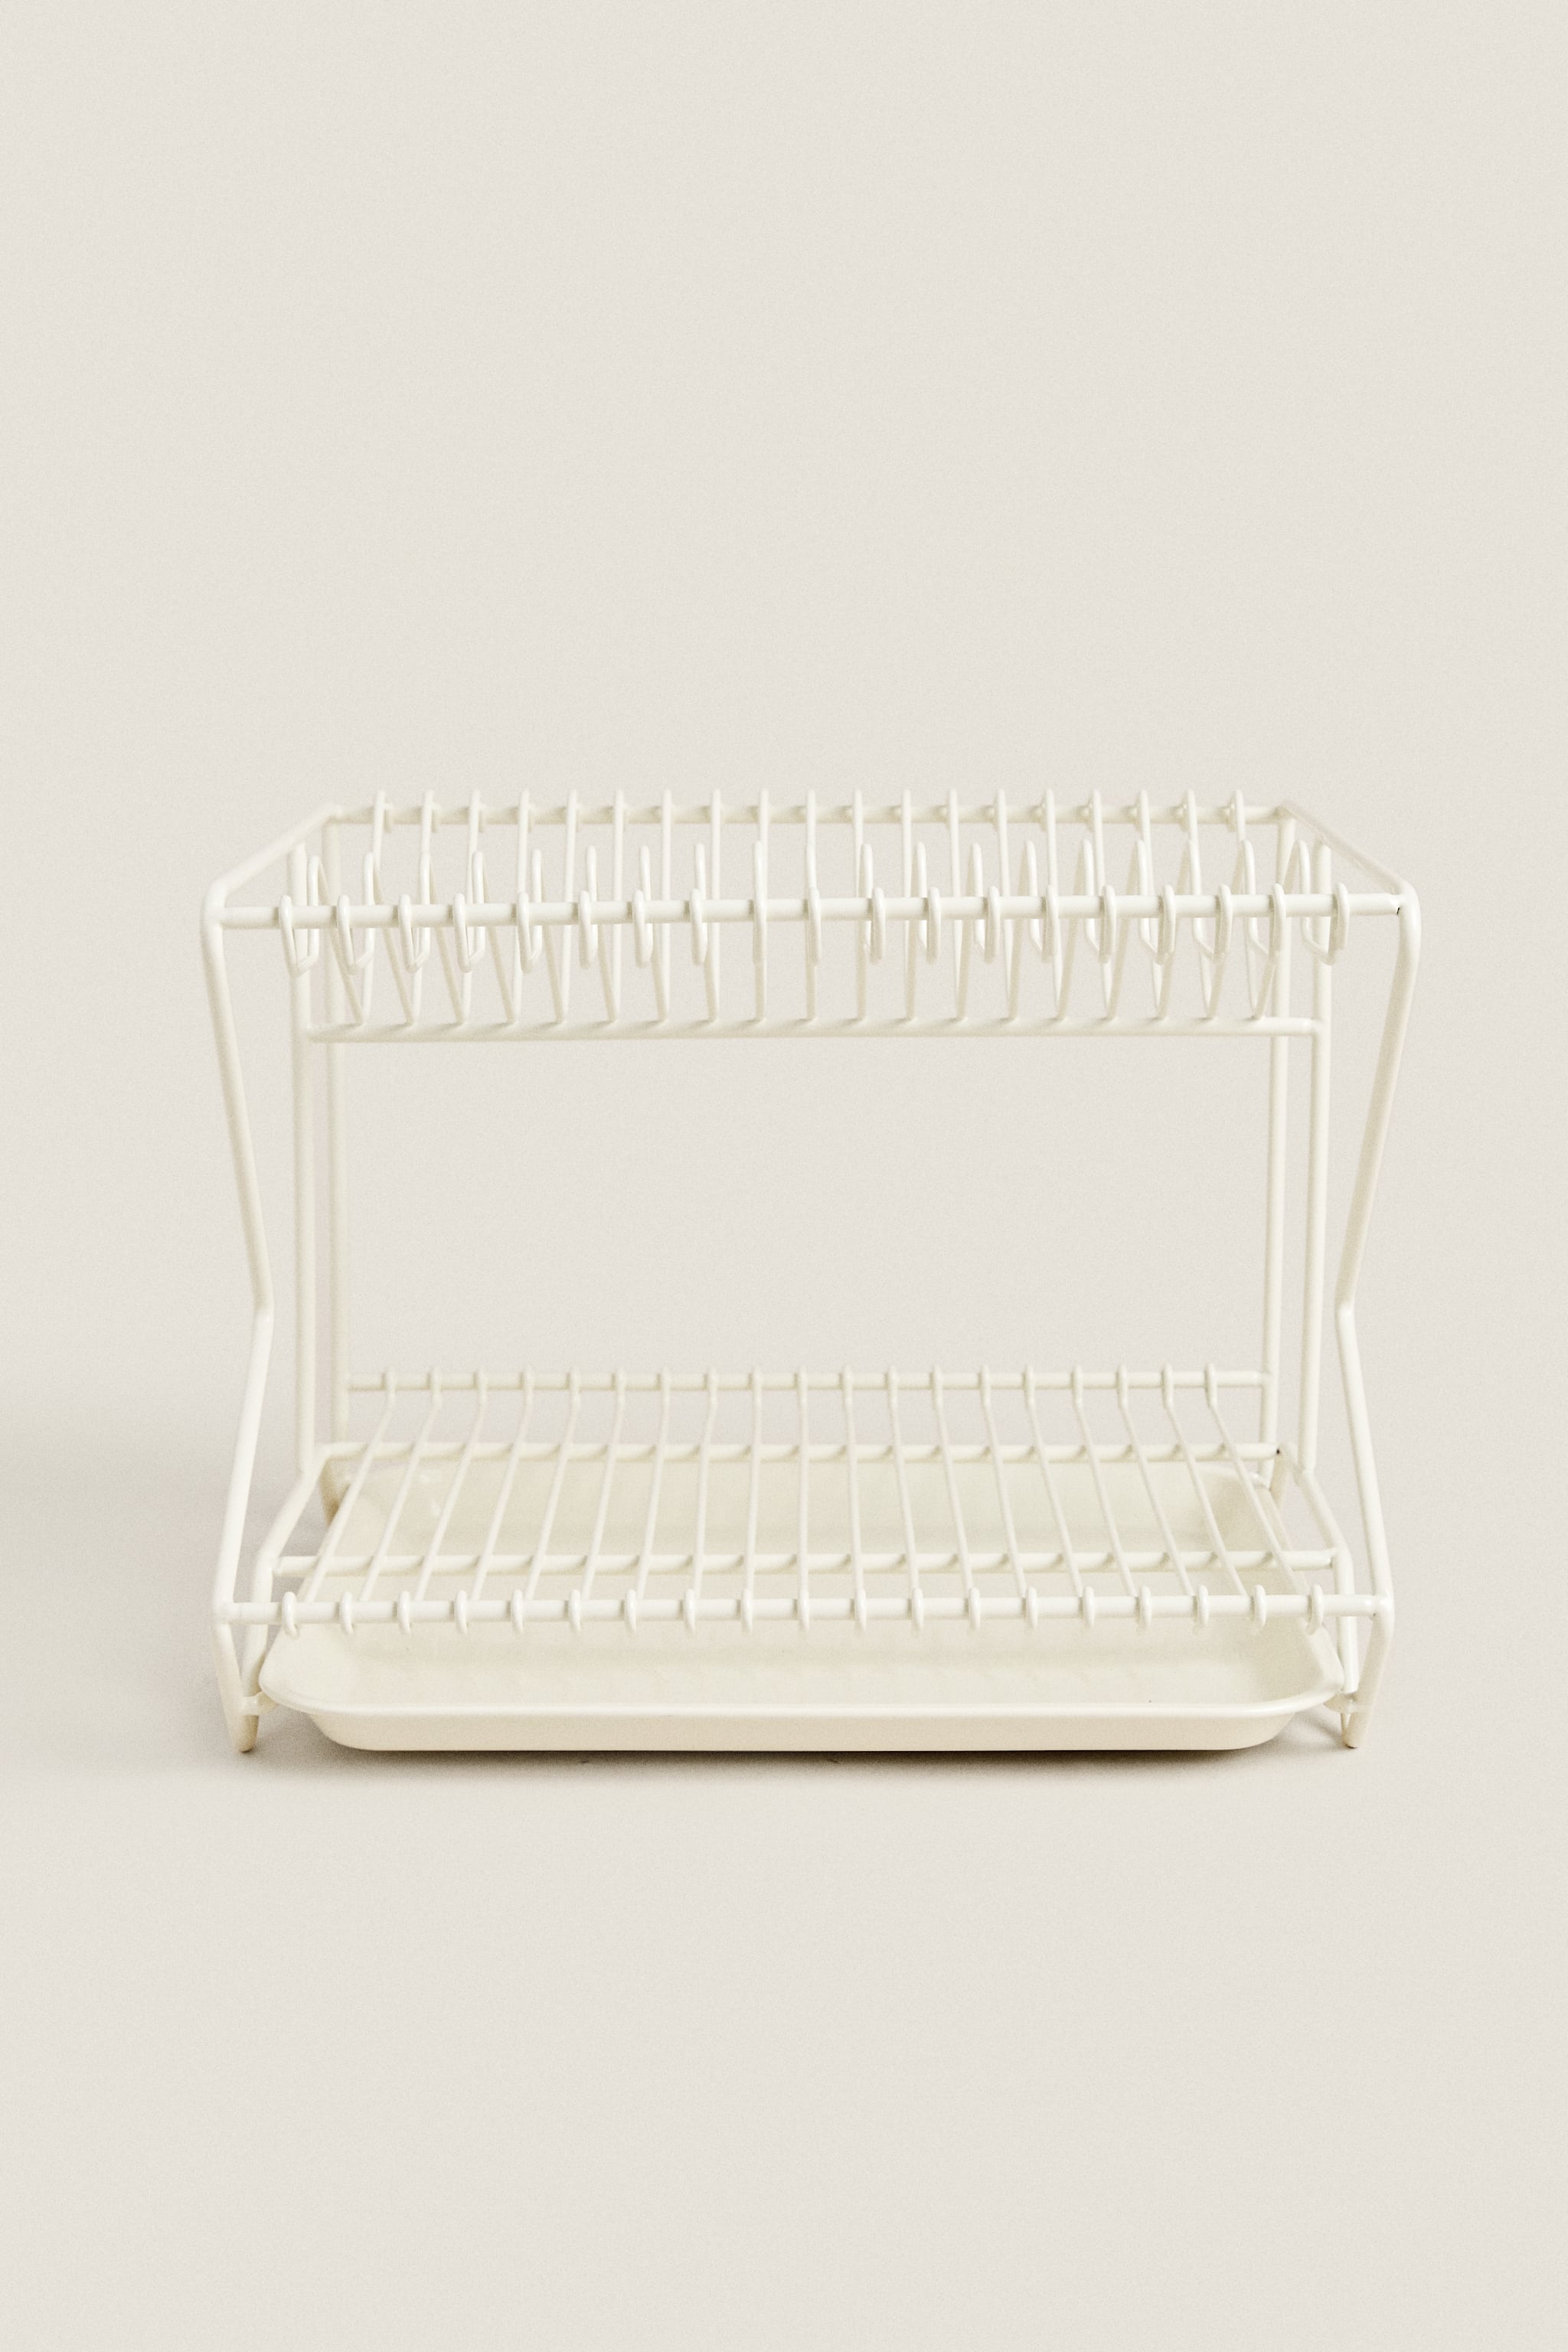 METAL DISH RACK WITH TRAY